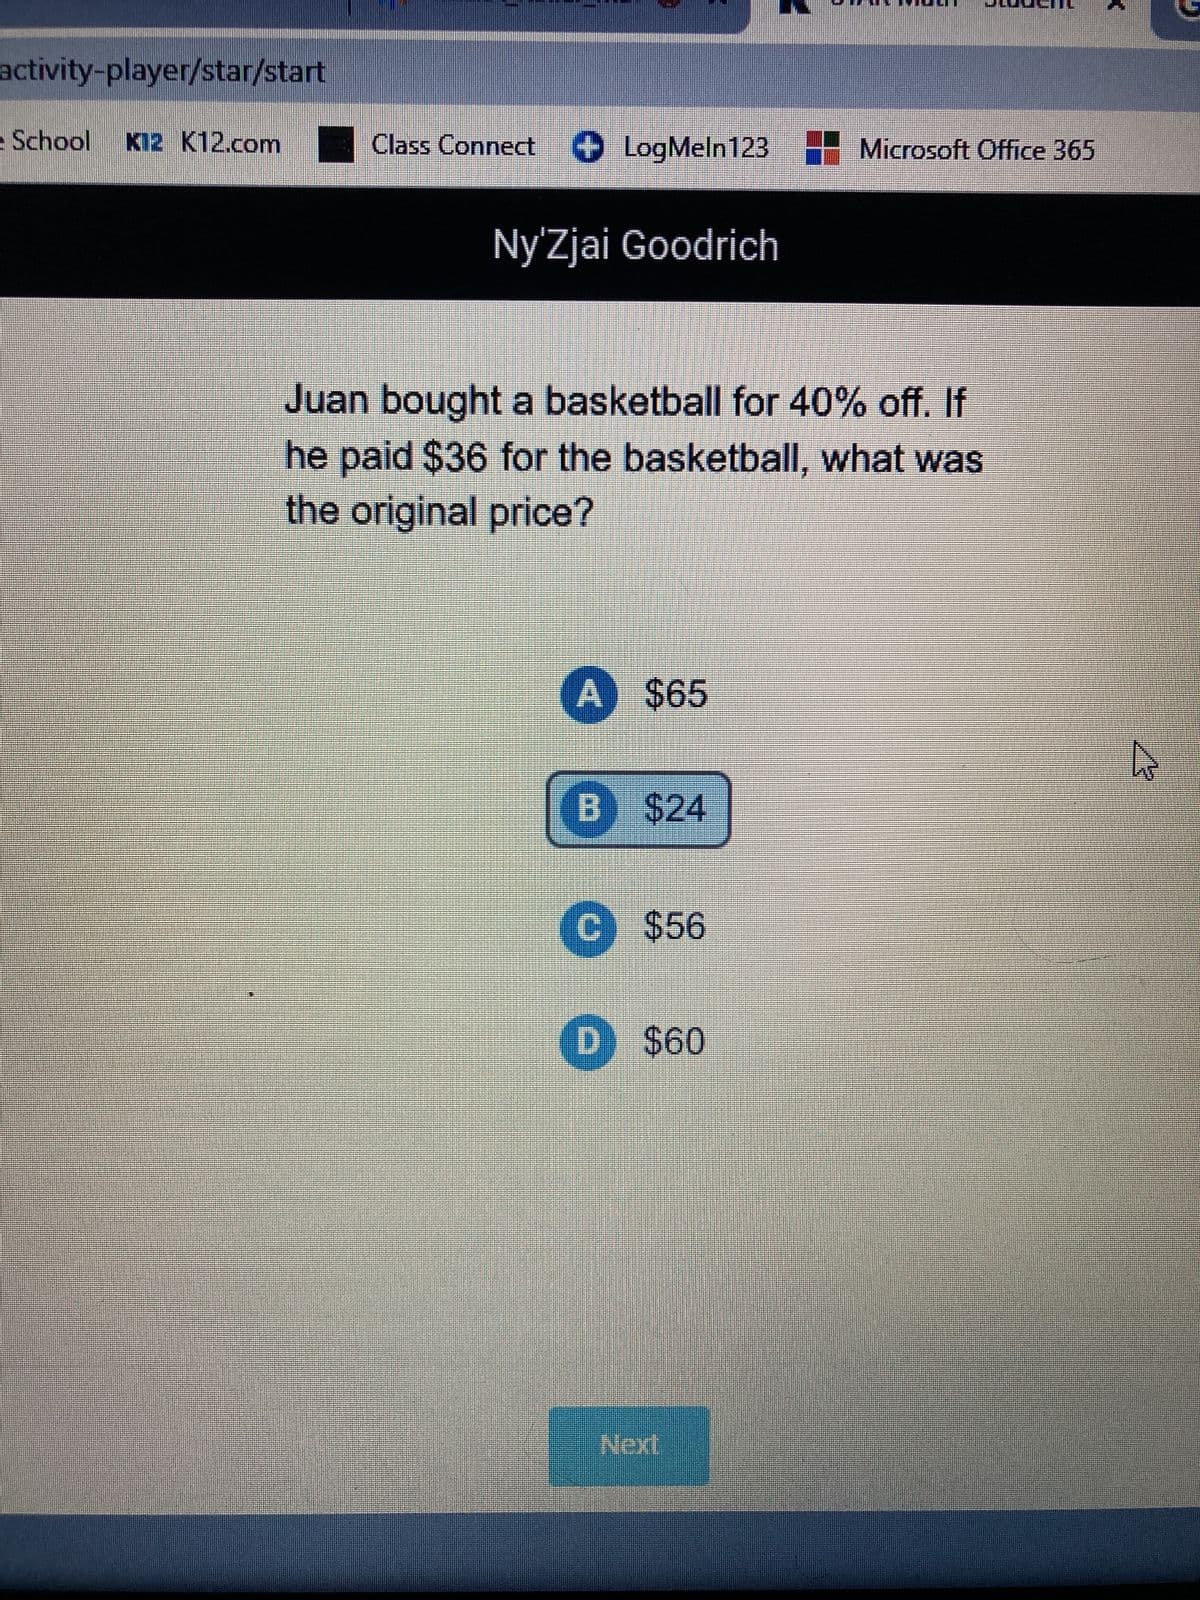 activity-player/star/start
School K12 K12.com Class Connect LogMeln123 Microsoft Office 365
Ny'Zjai Goodrich
Juan bought a basketball for 40% off. If
he paid $36 for the basketball, what was
the original price?
A
$65
B $24
C $56
D) $60
Next
N